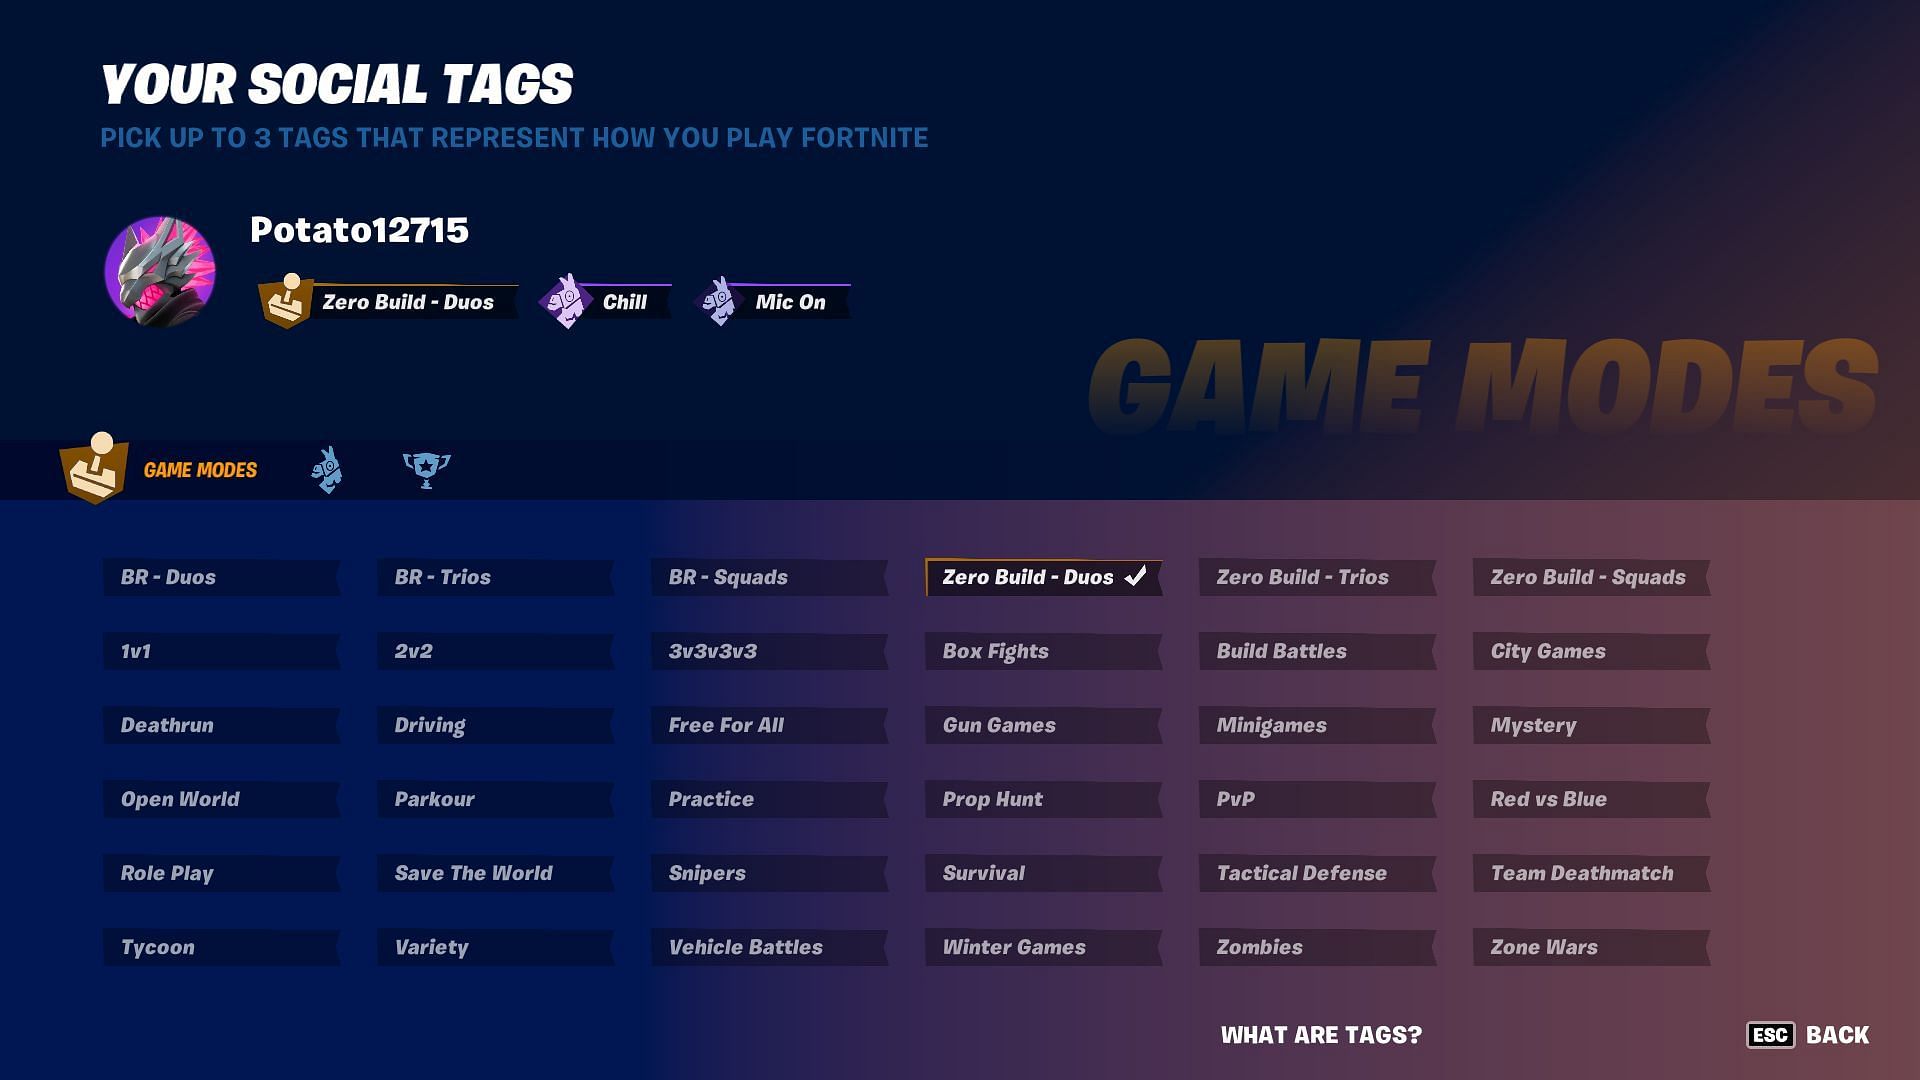 It seems like the Zombie tag is still popular (Image via Epic Games)